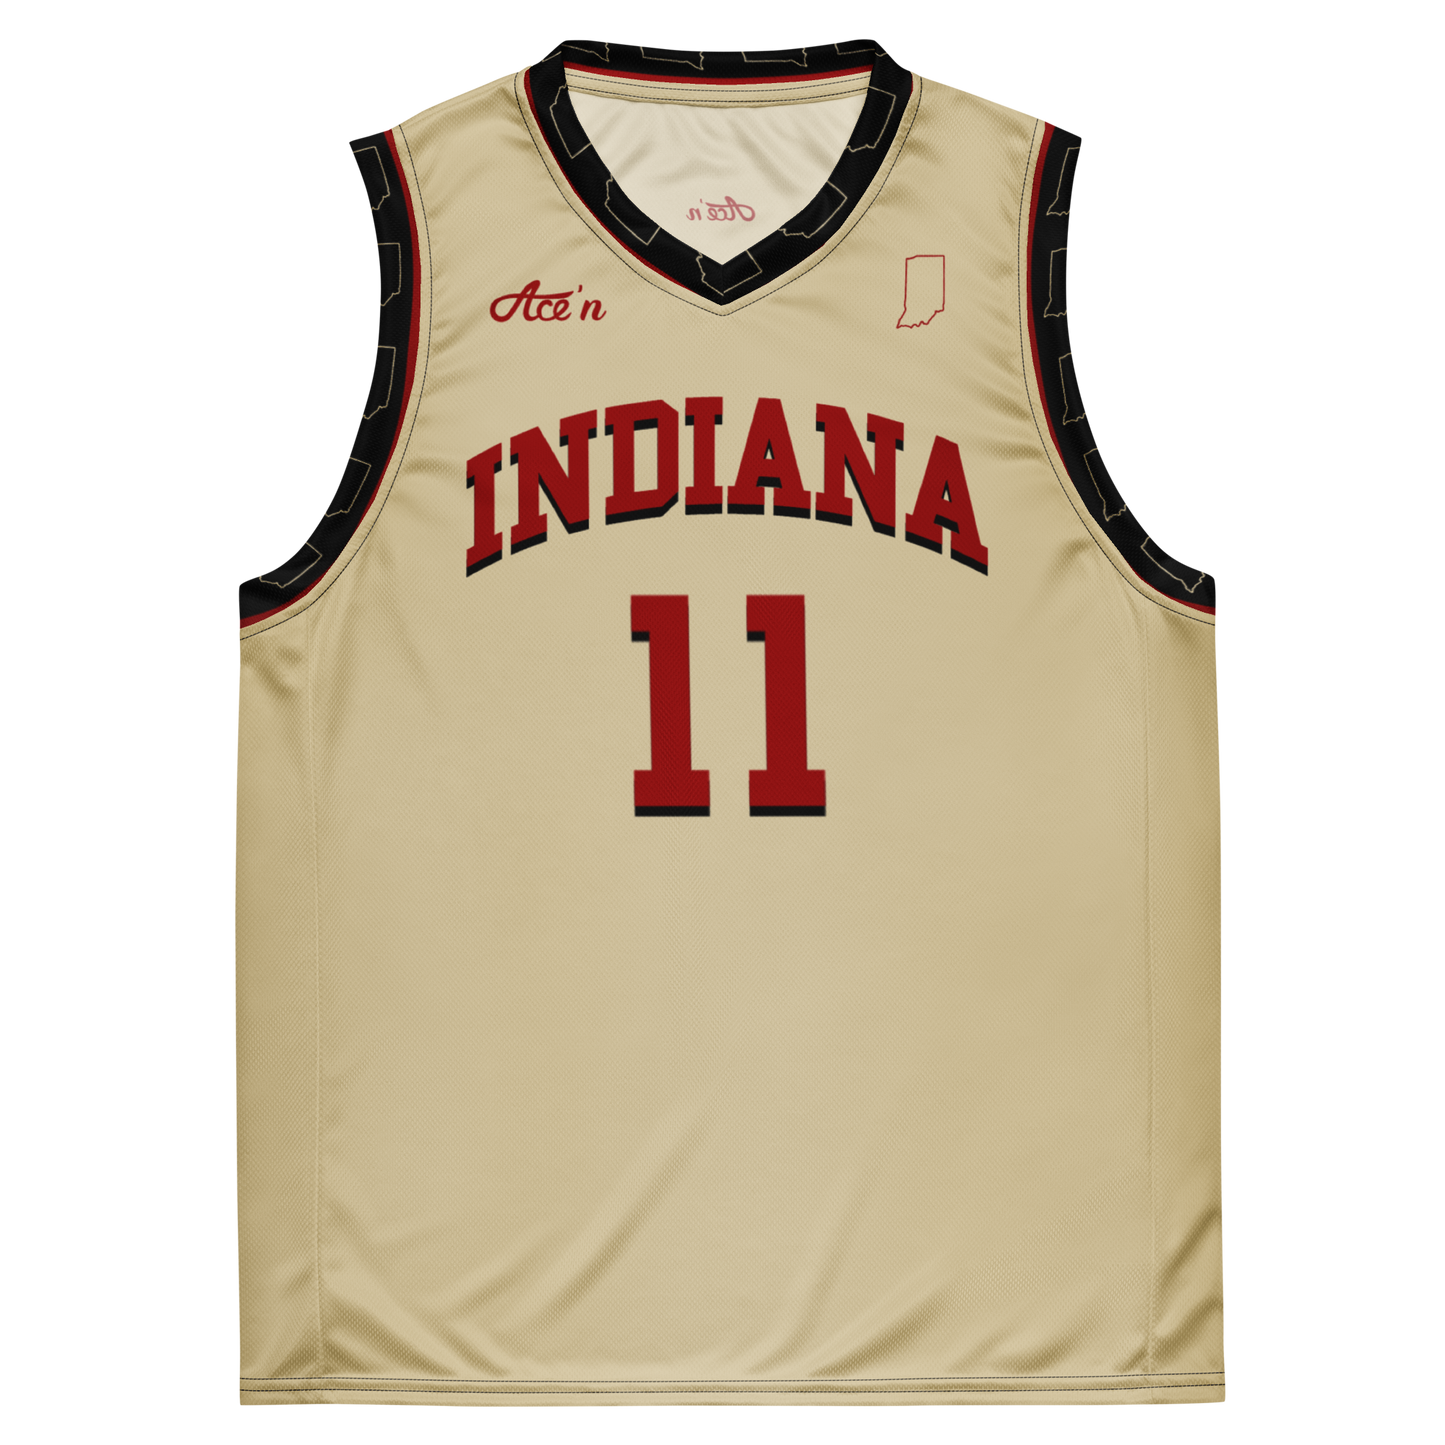 Ace'n "Indiana" Jersey